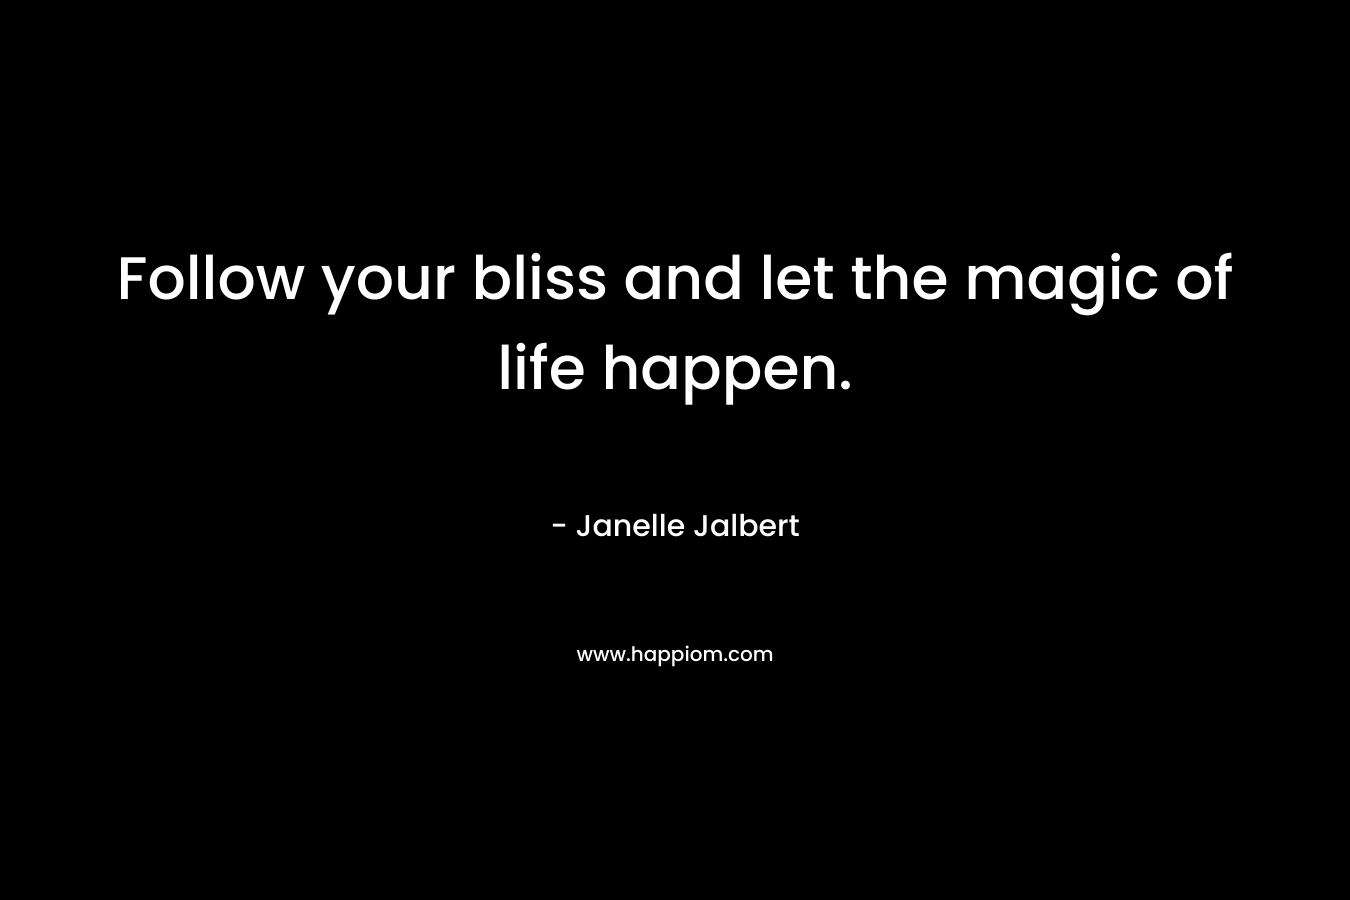 Follow your bliss and let the magic of life happen. – Janelle Jalbert